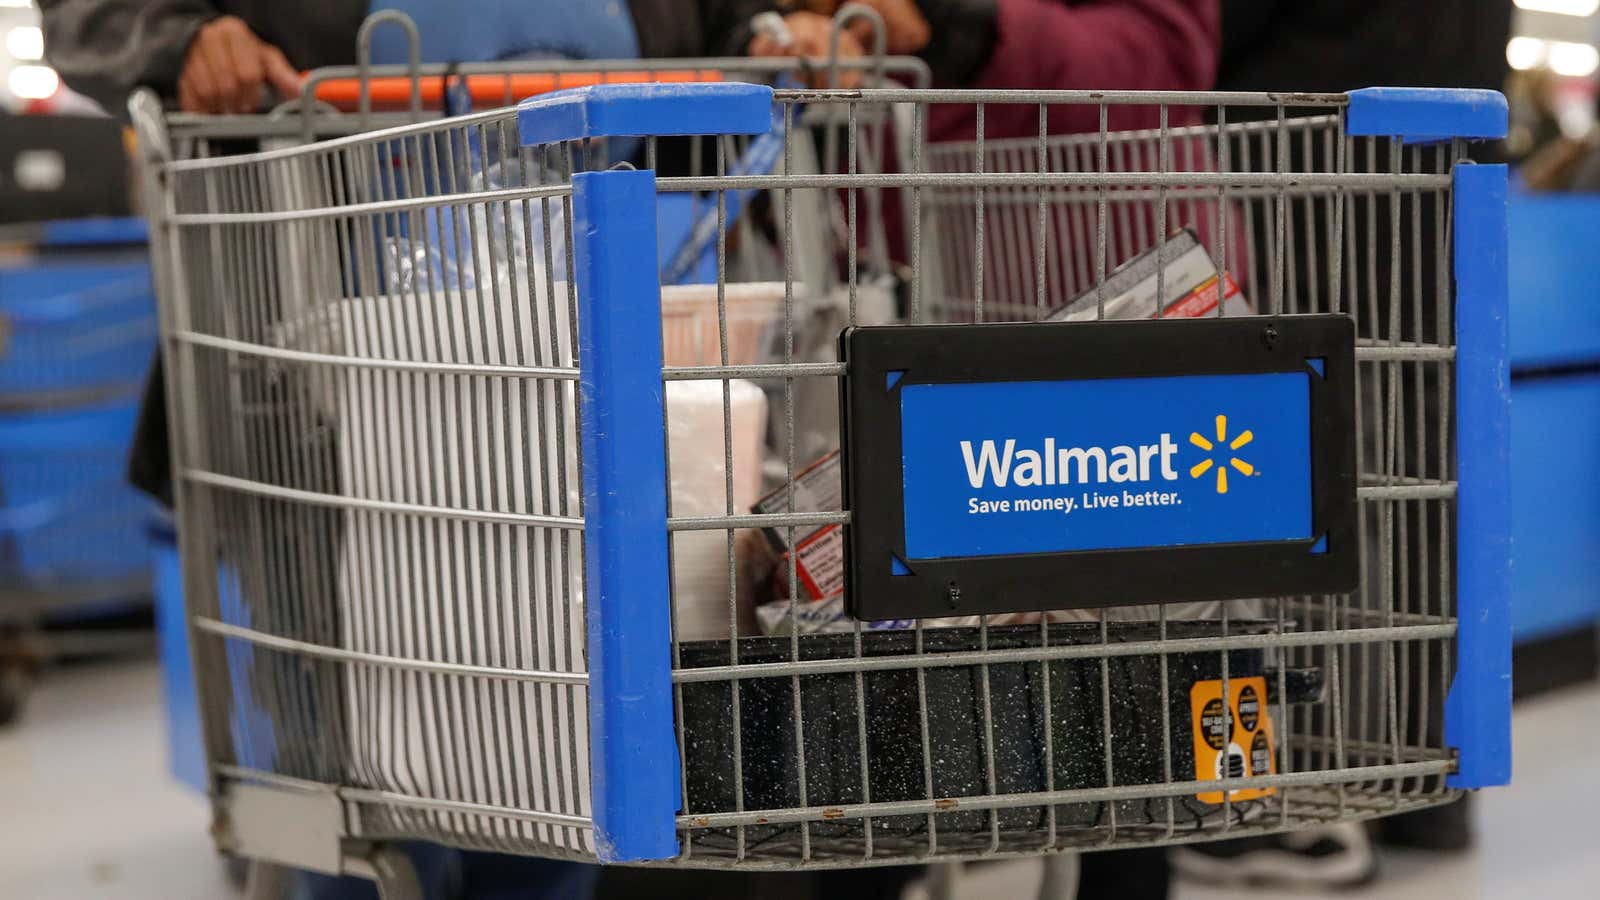 Walmart has teamed with Microsoft to put in a bid on TikTok. But why?